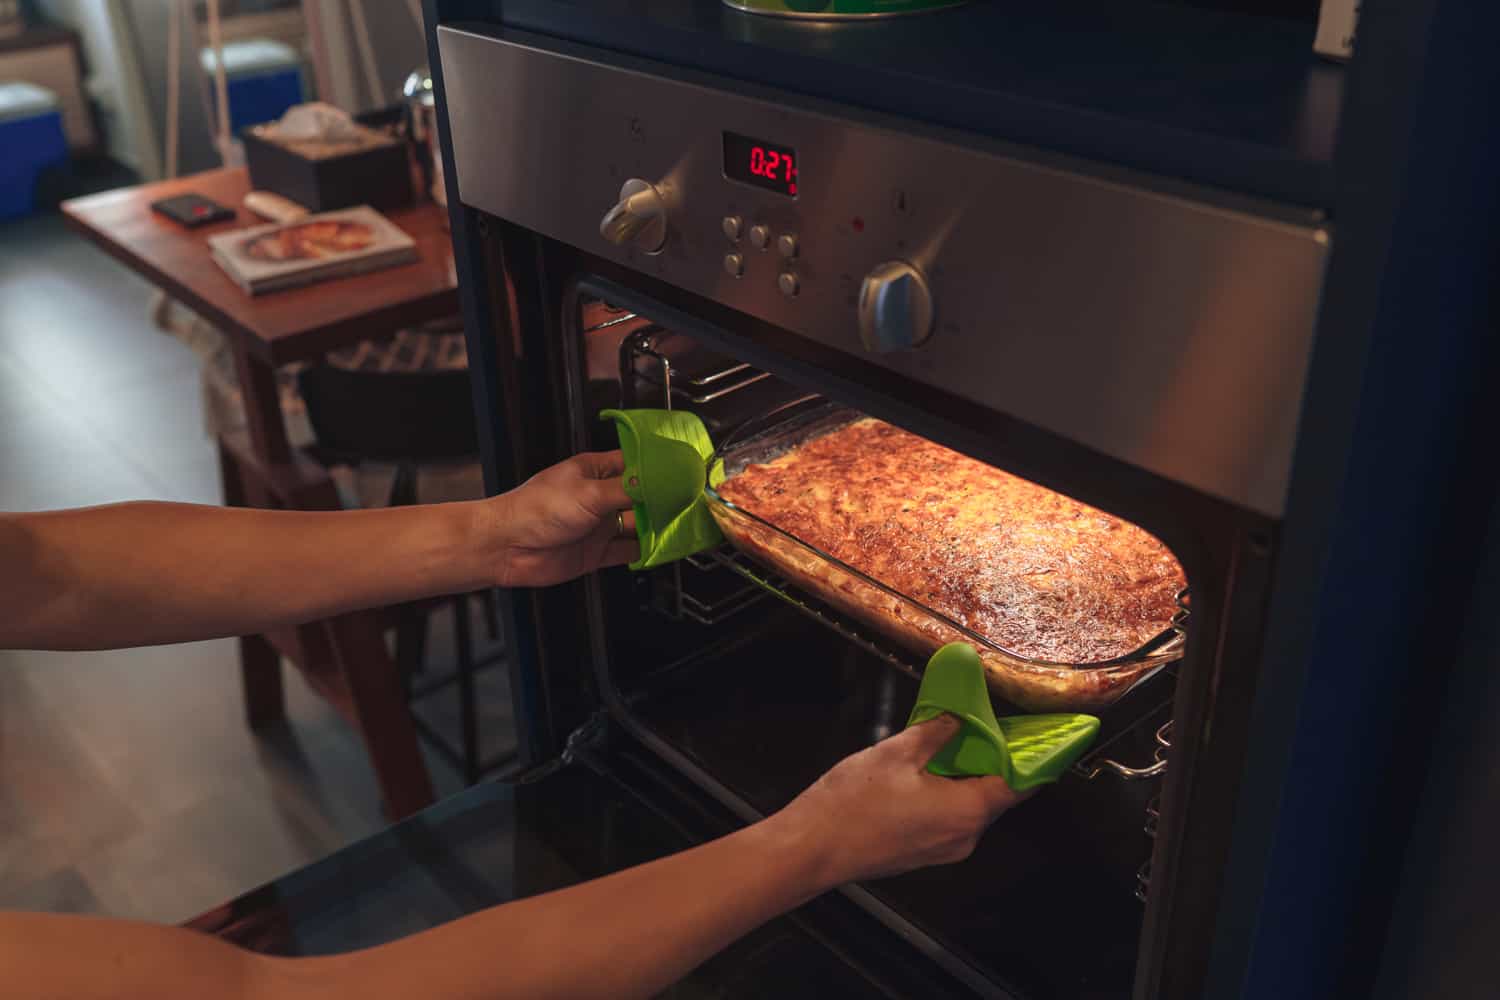 A pair of hands retrieving freshly baked lasagne from the oven